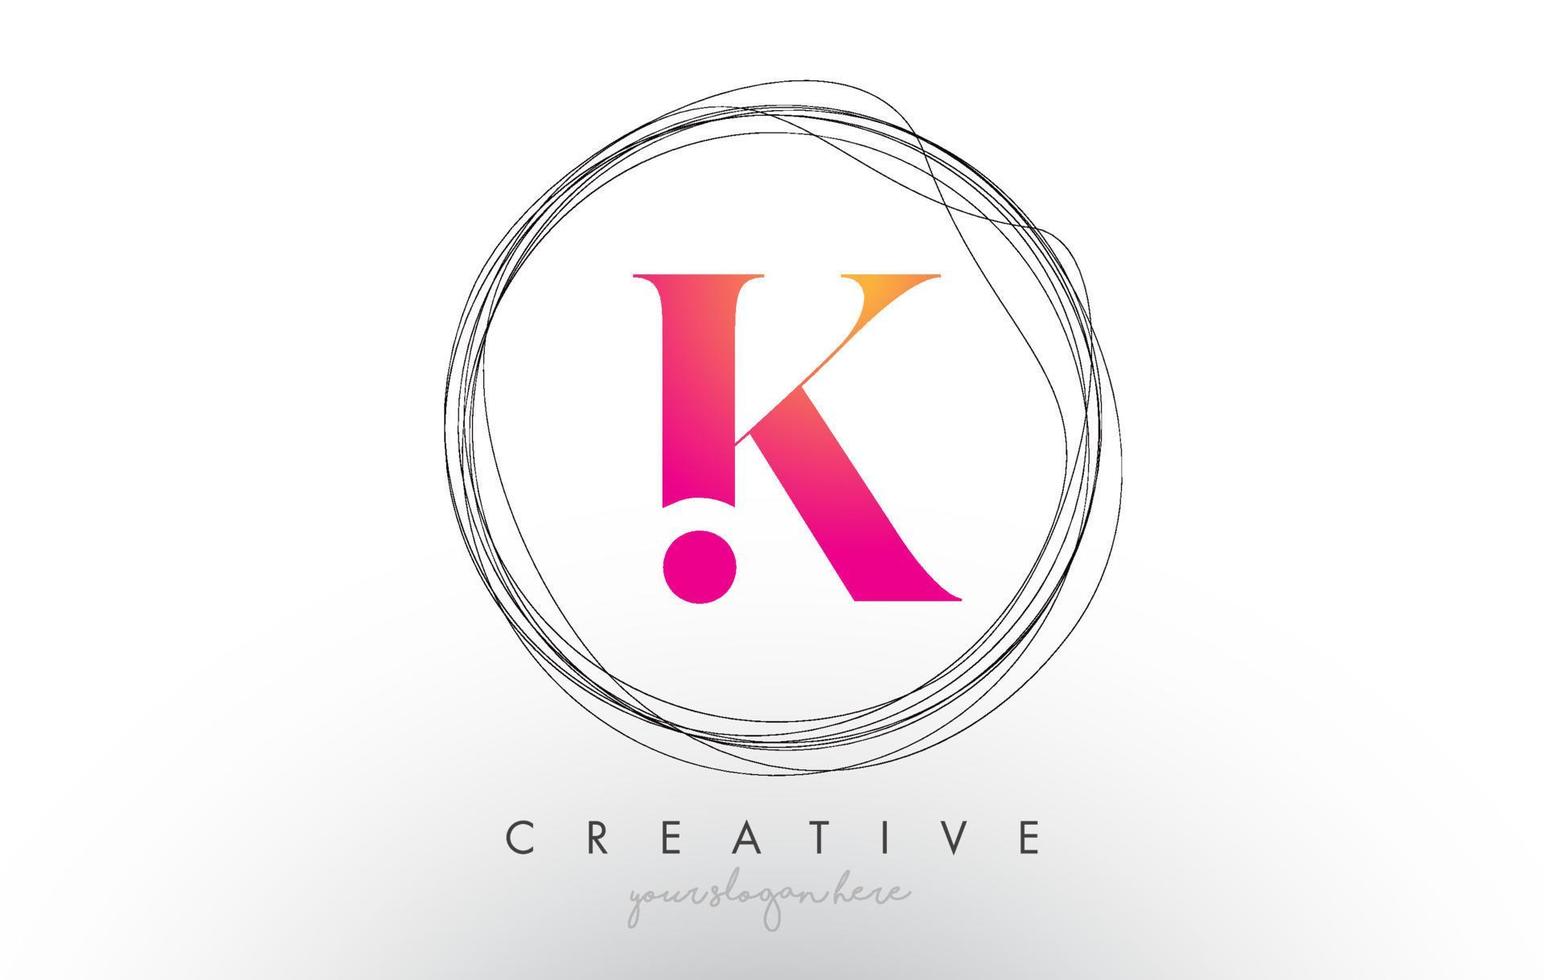 Artistic K Letter Logo Design With Creative Circular Wire Frame around it vector